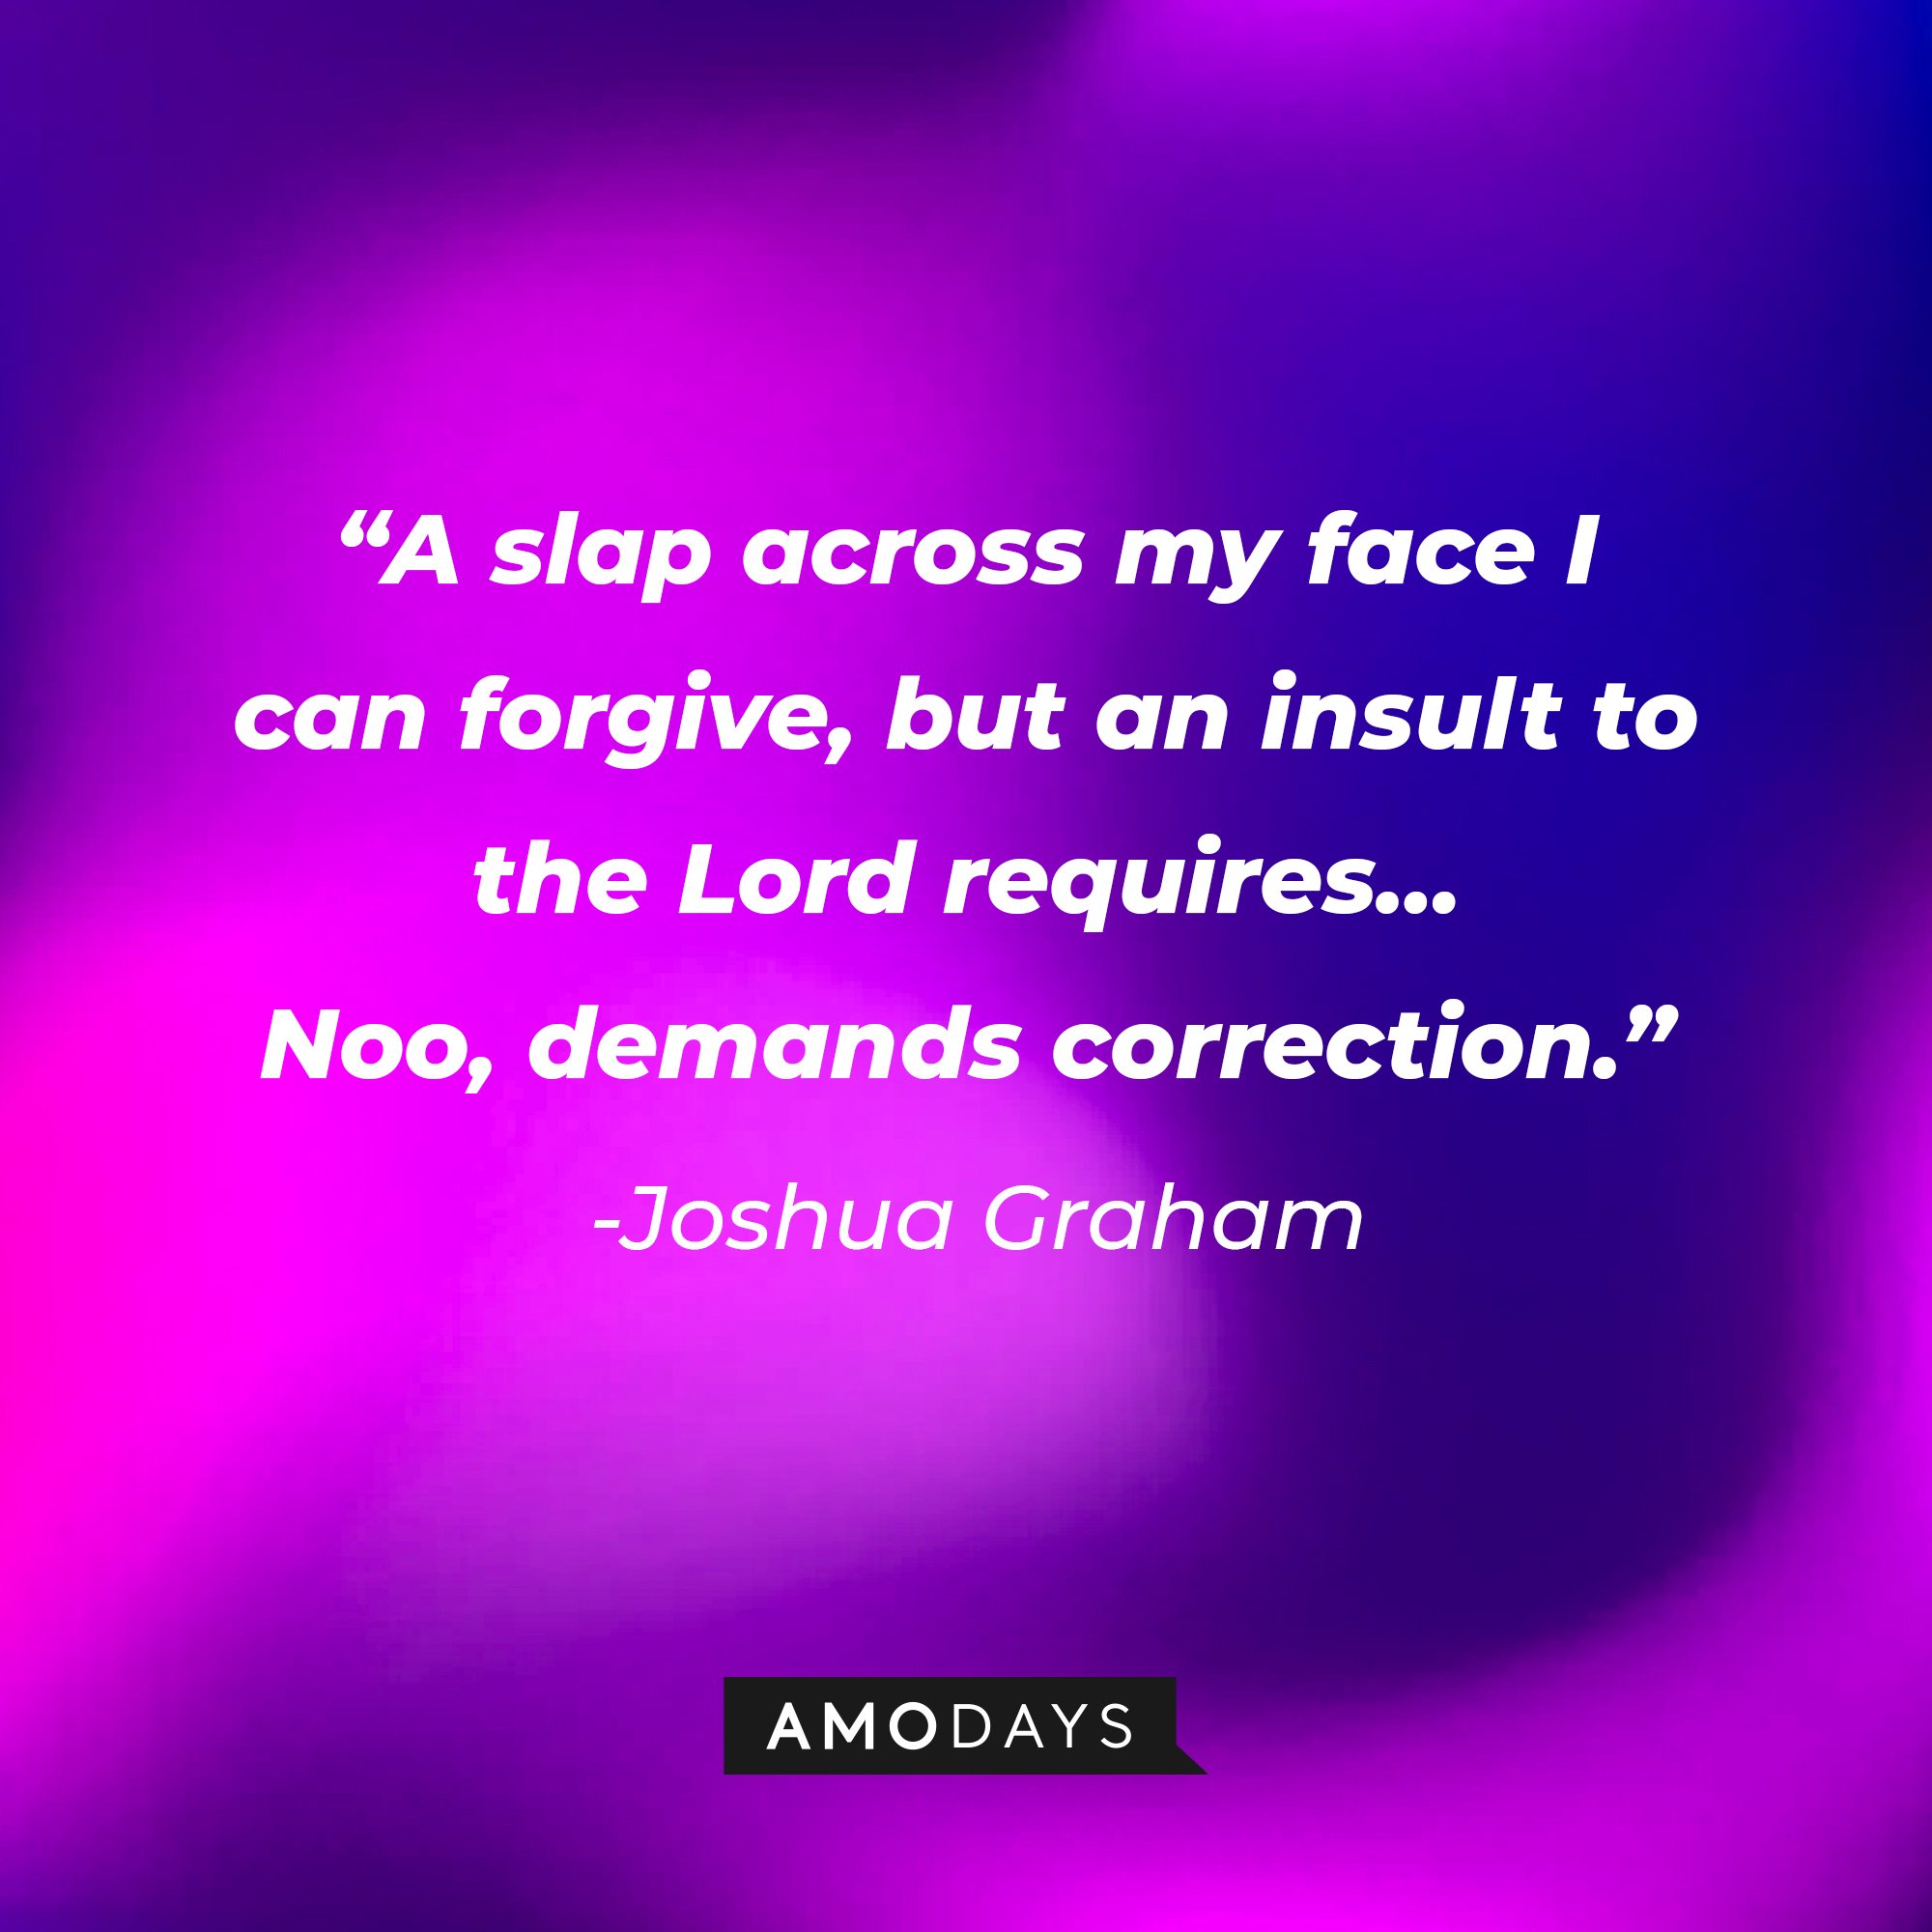 Joshua Graham's quote: “A slap across my face I can forgive, but an insult to the Lord requires… Noo, demands correction.” | Source: Amodays